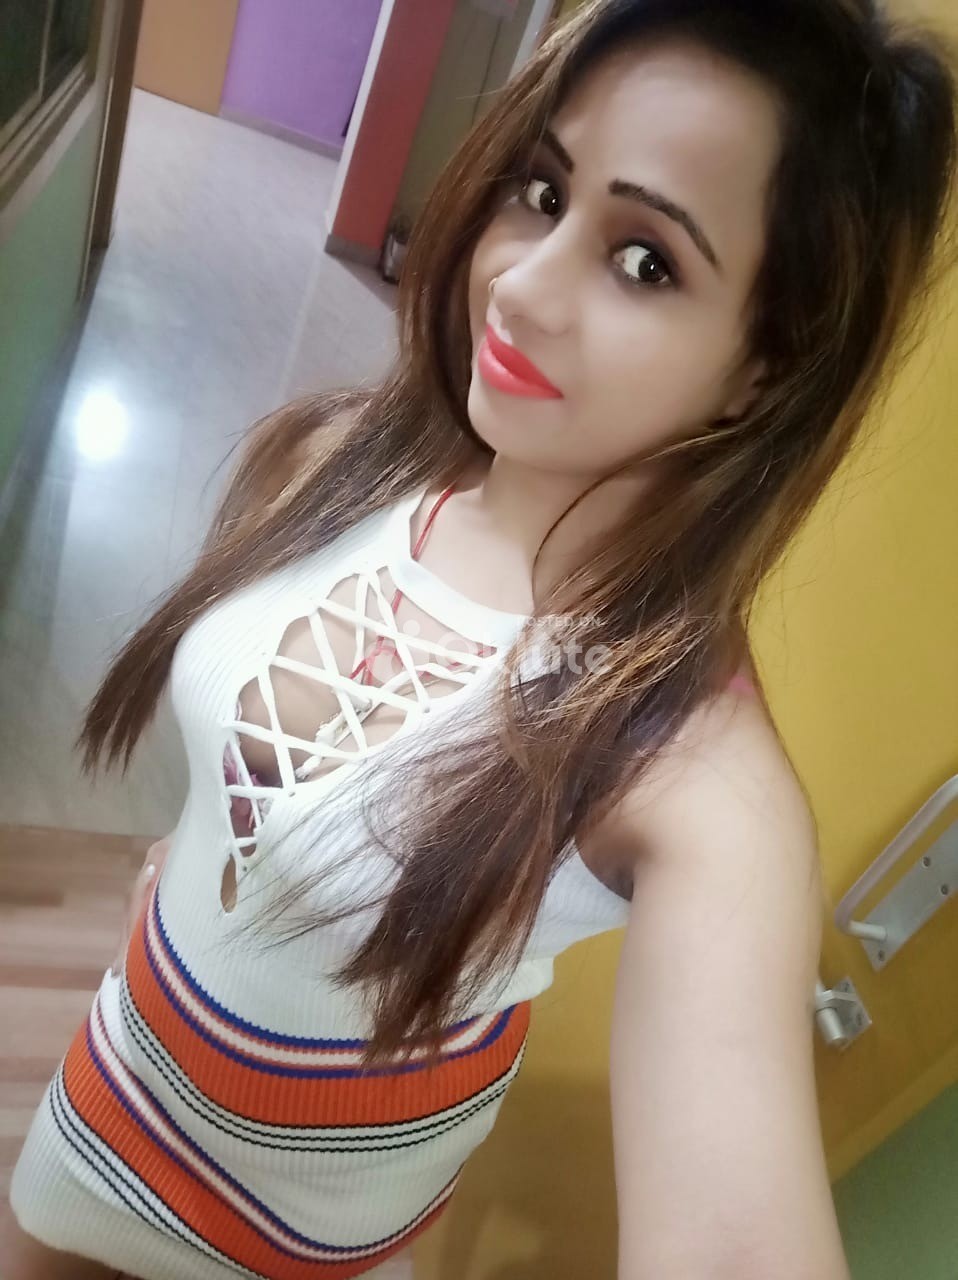 Ambala call girls who can give message sexual pleasure to client